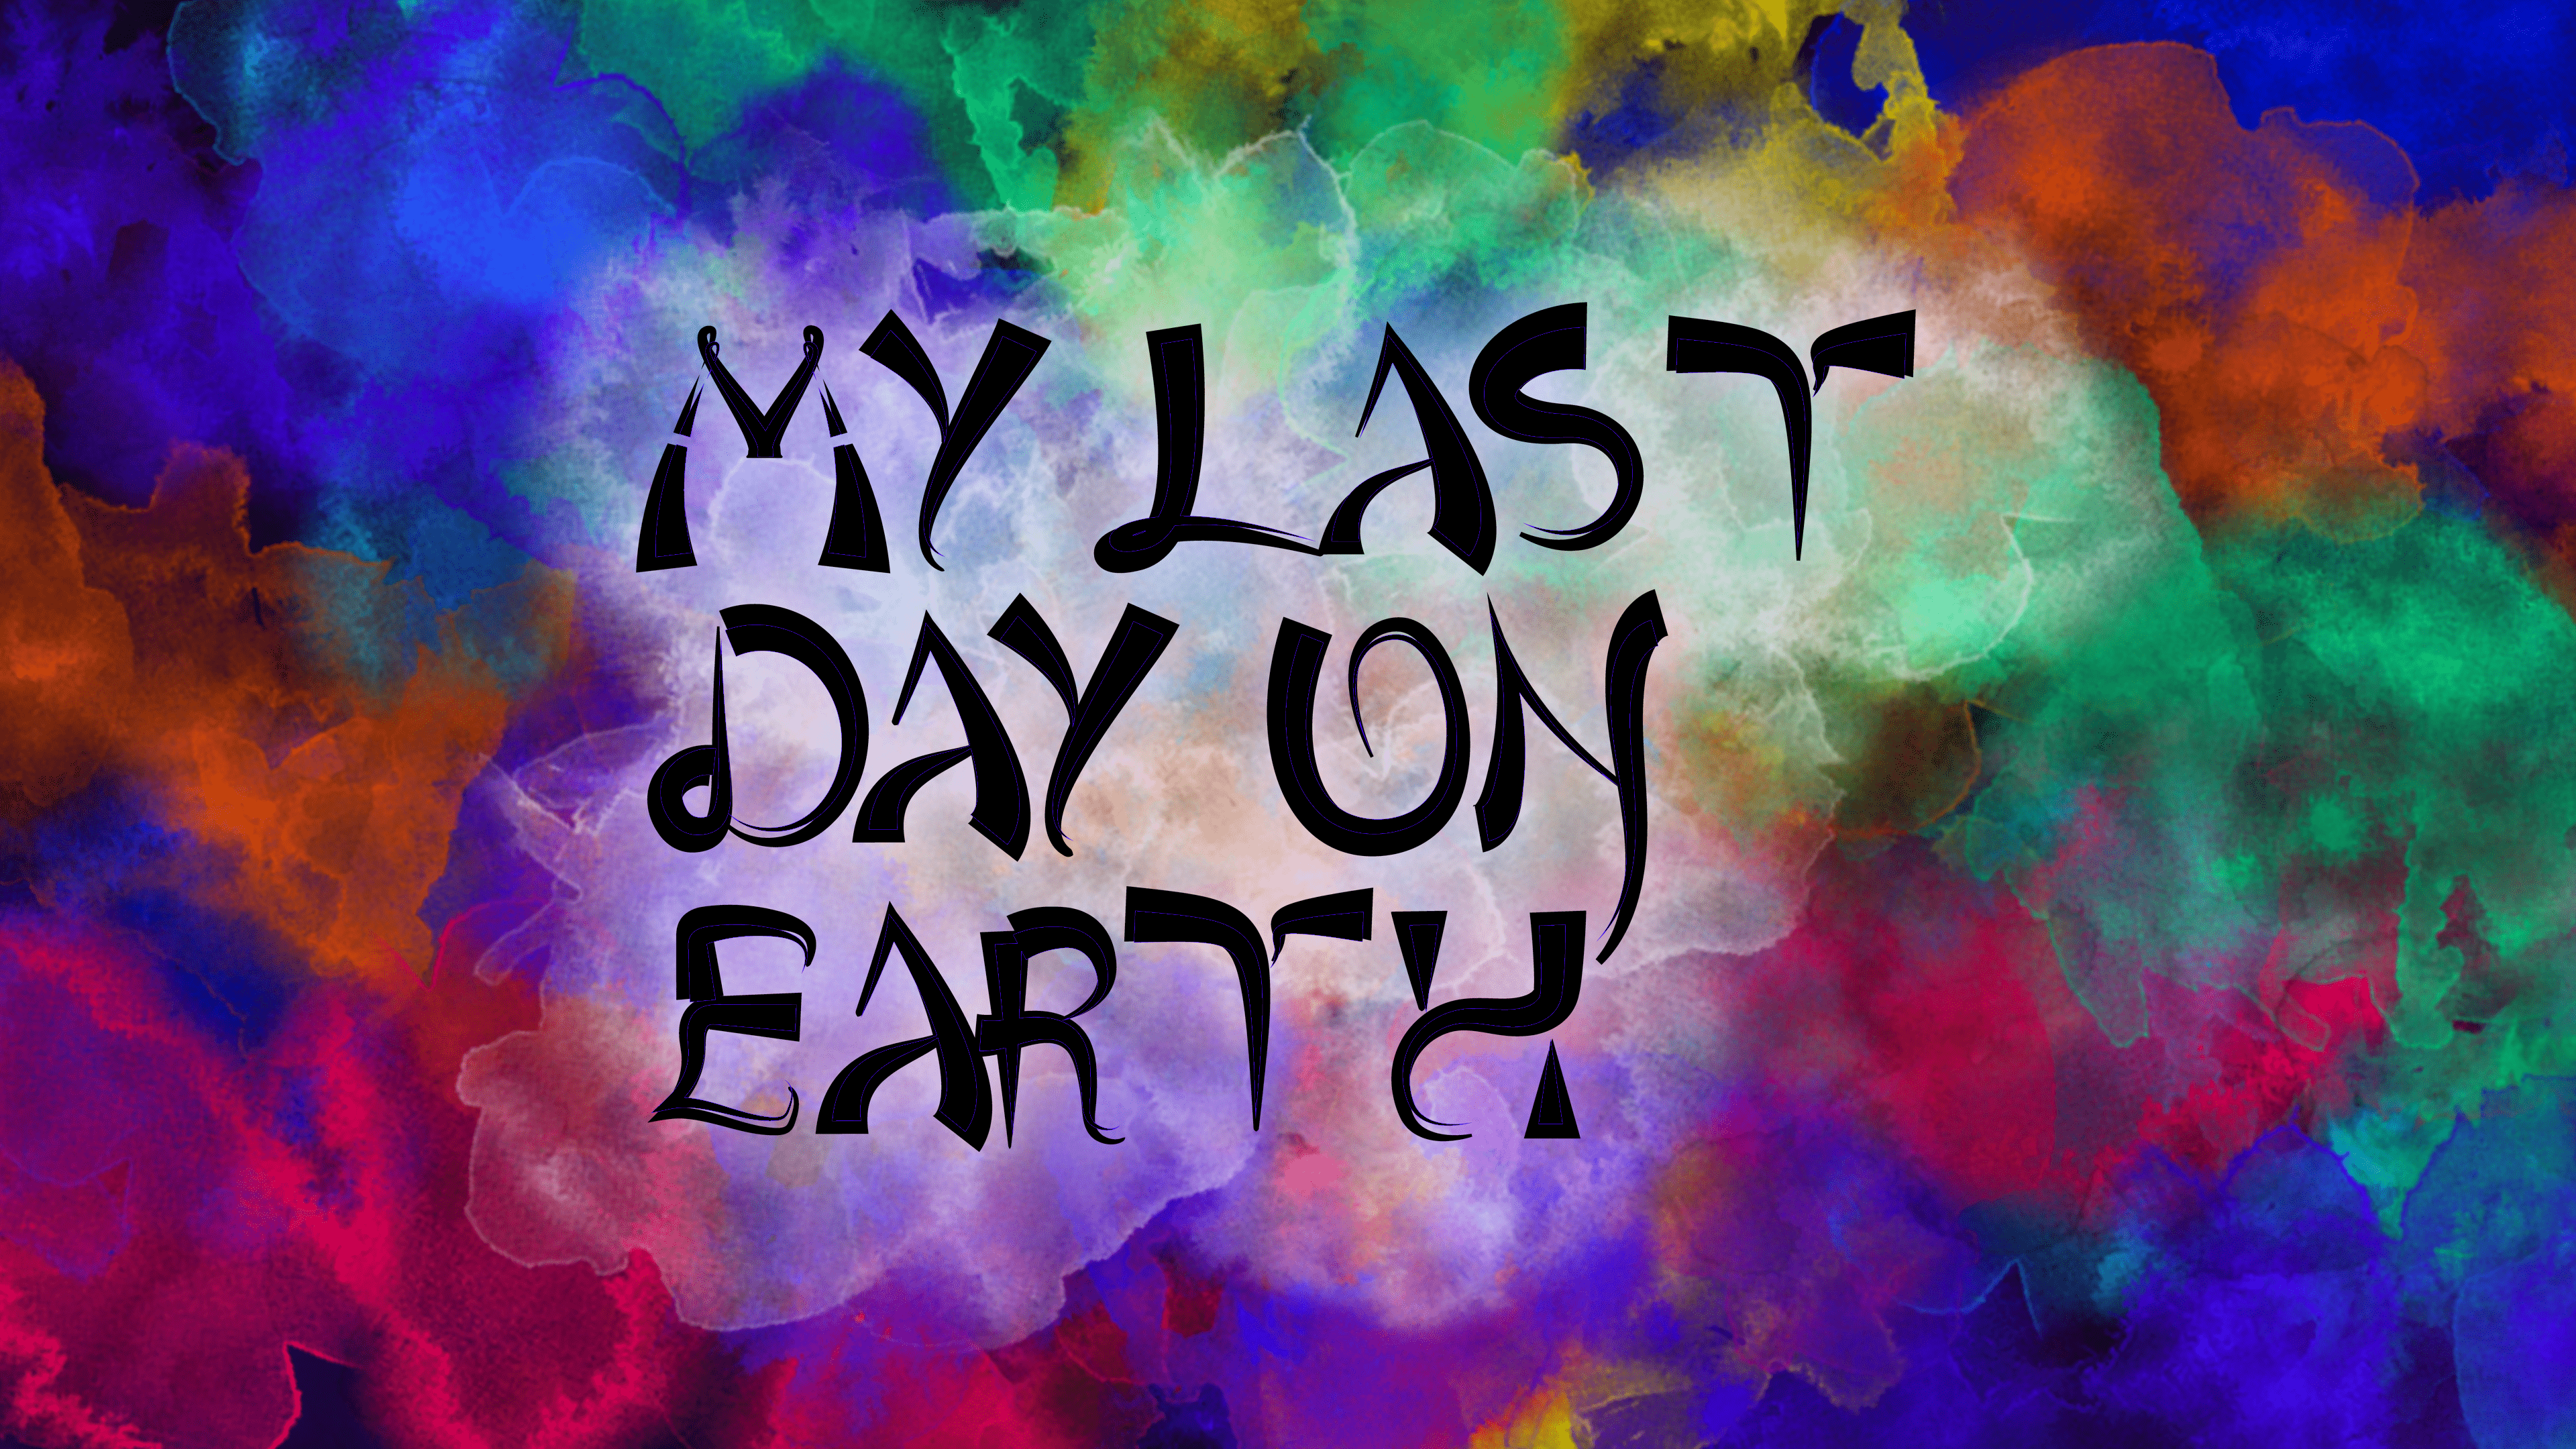 My Last Day on Earth